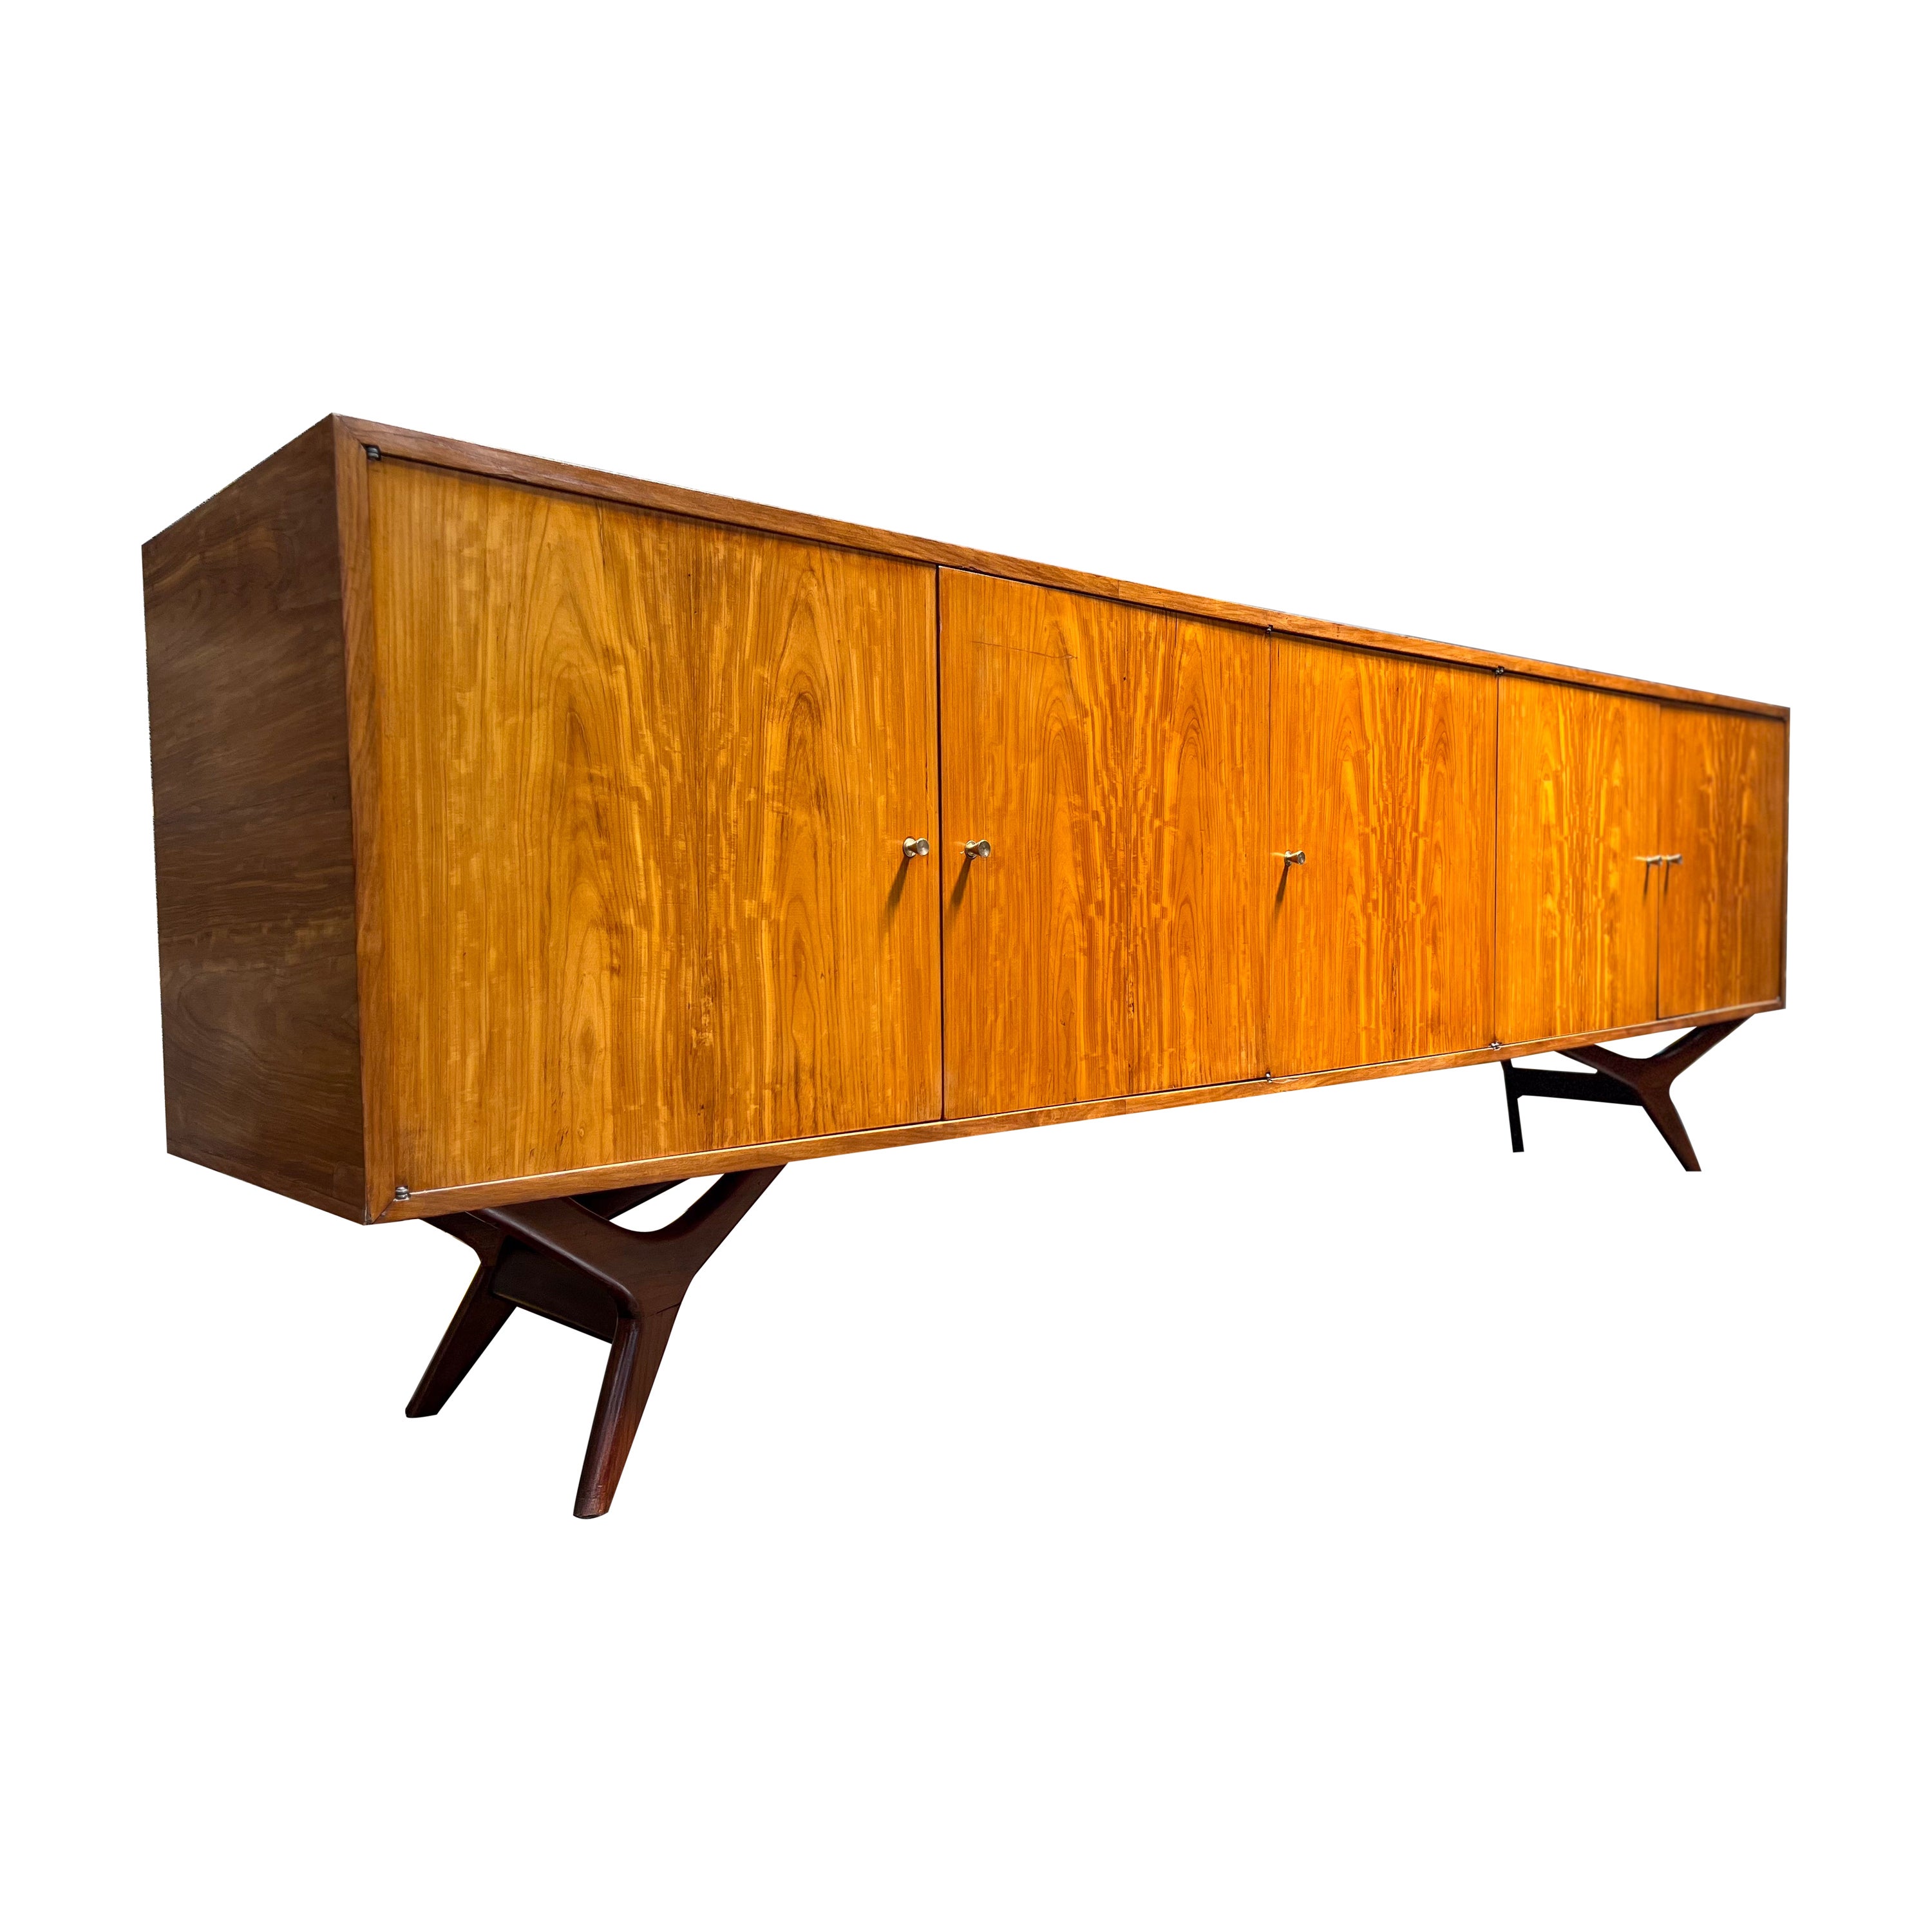 Available today, this magnificent Mid-Century Modern Credenza in Caviuna Hardwood designed by Forma Moveis in Brazil during the sixties decade is absolutely gorgeous!

The piece is entirely made of Caviuna hardwood and features five doors with brass